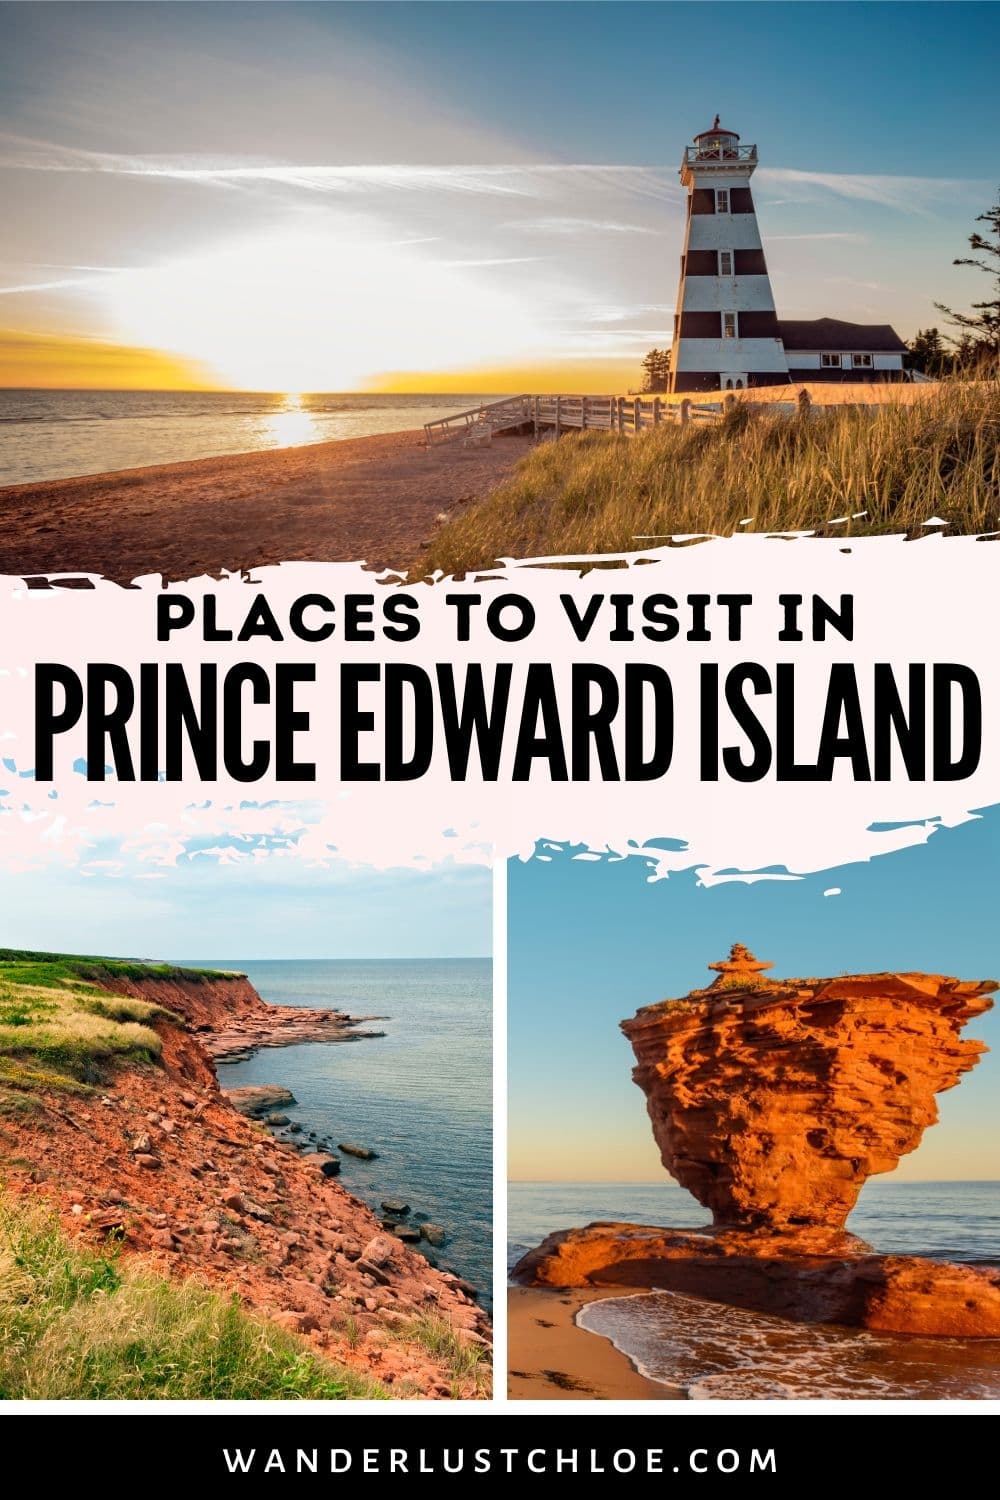 Places to visit in Prince Edward Island